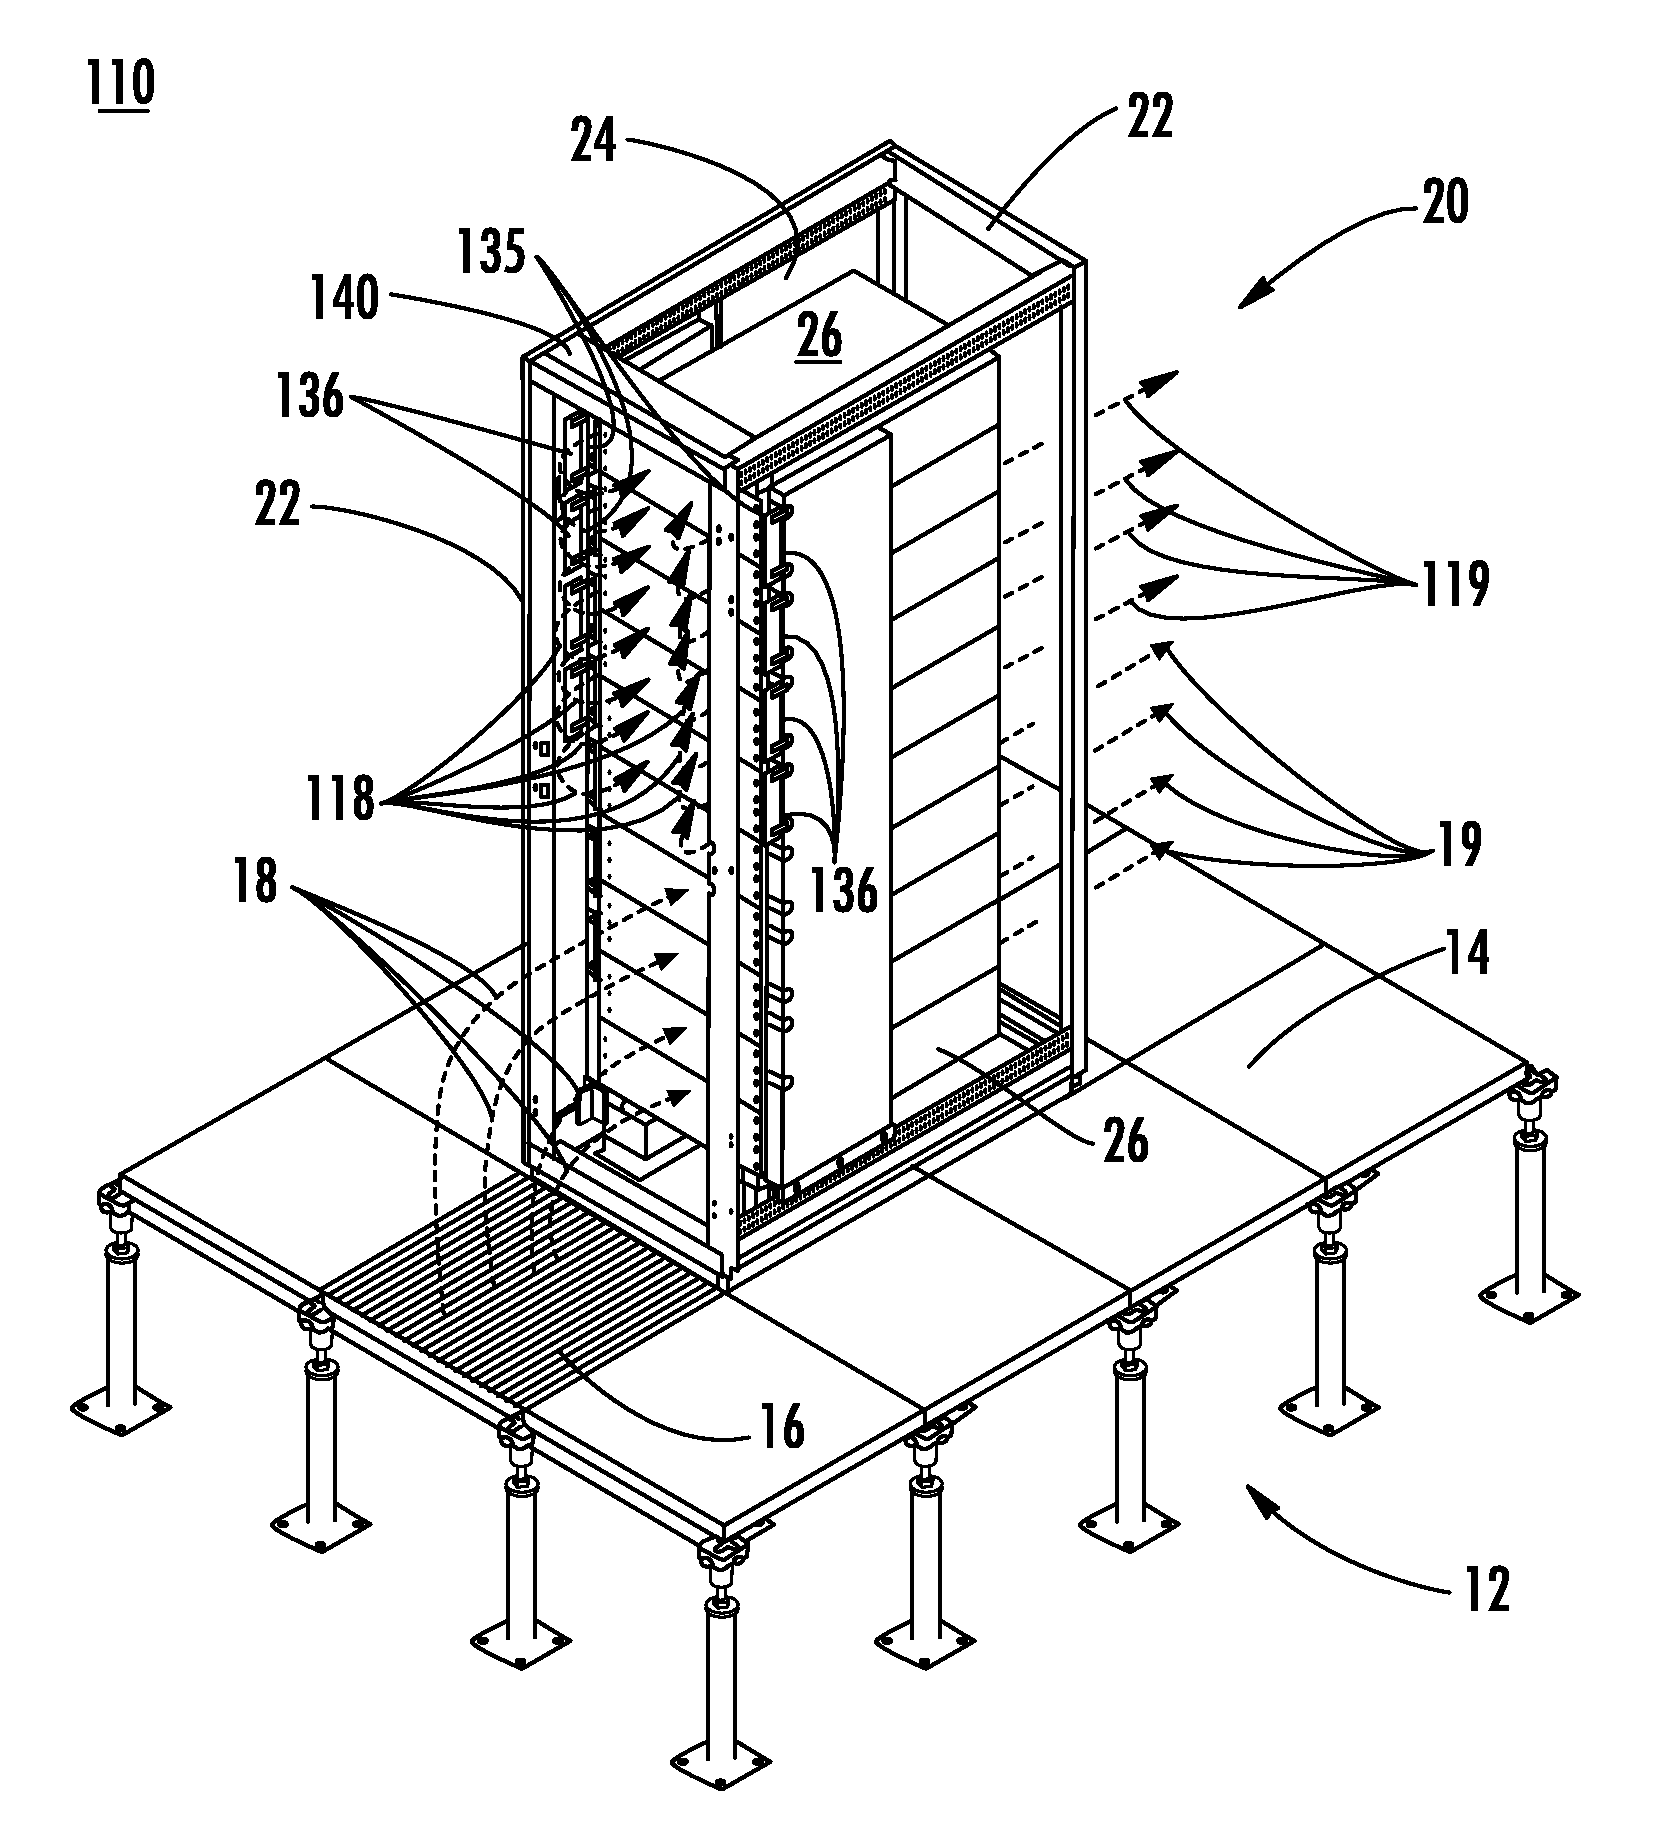 Selectively routing air within an electronic equipment enclosure